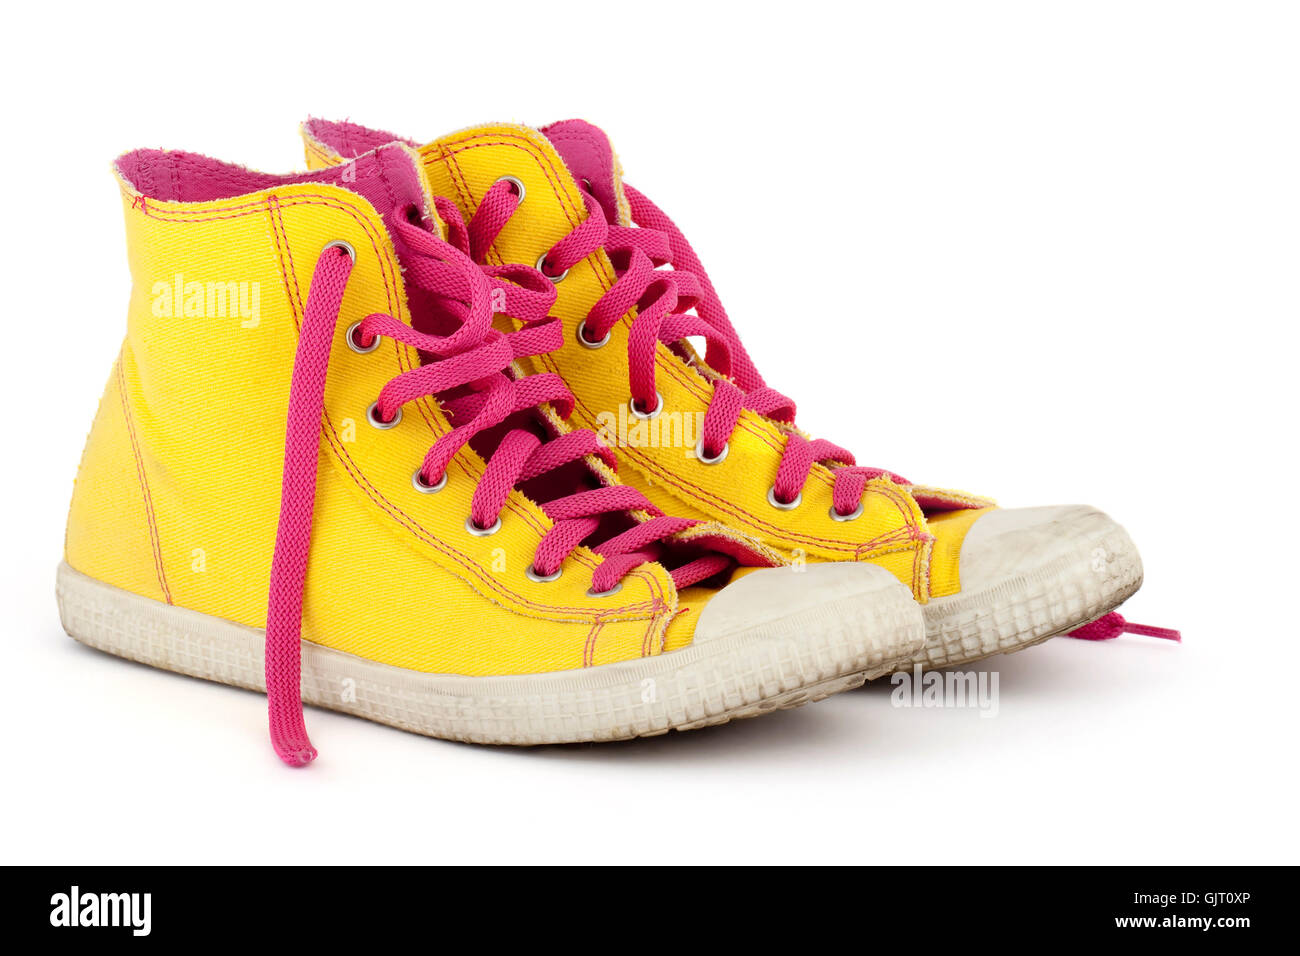 yellow shoes with pink shoelace Stock Photo